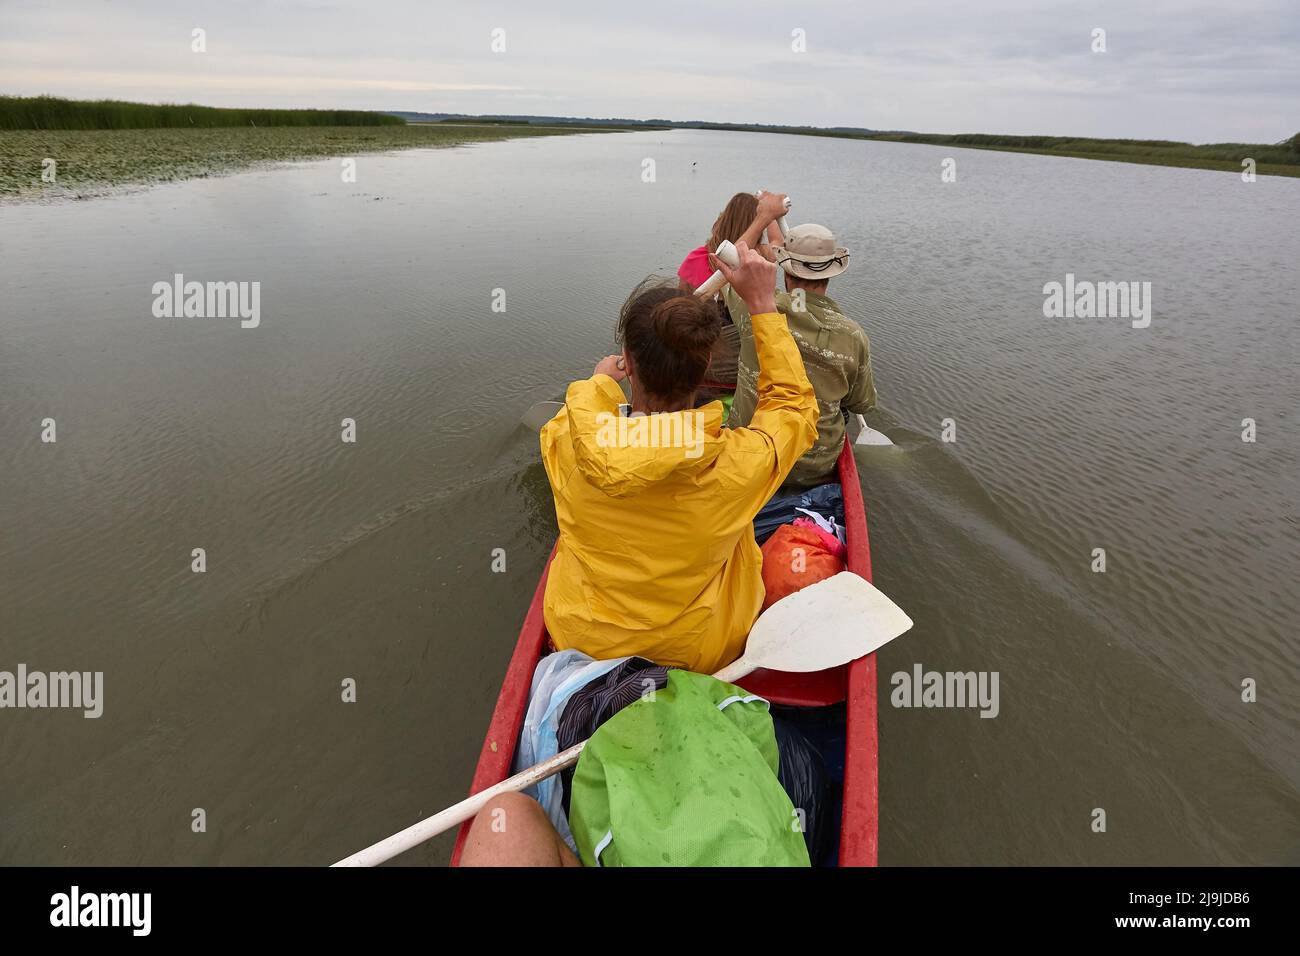 Canoeing on a lake Stock Photo